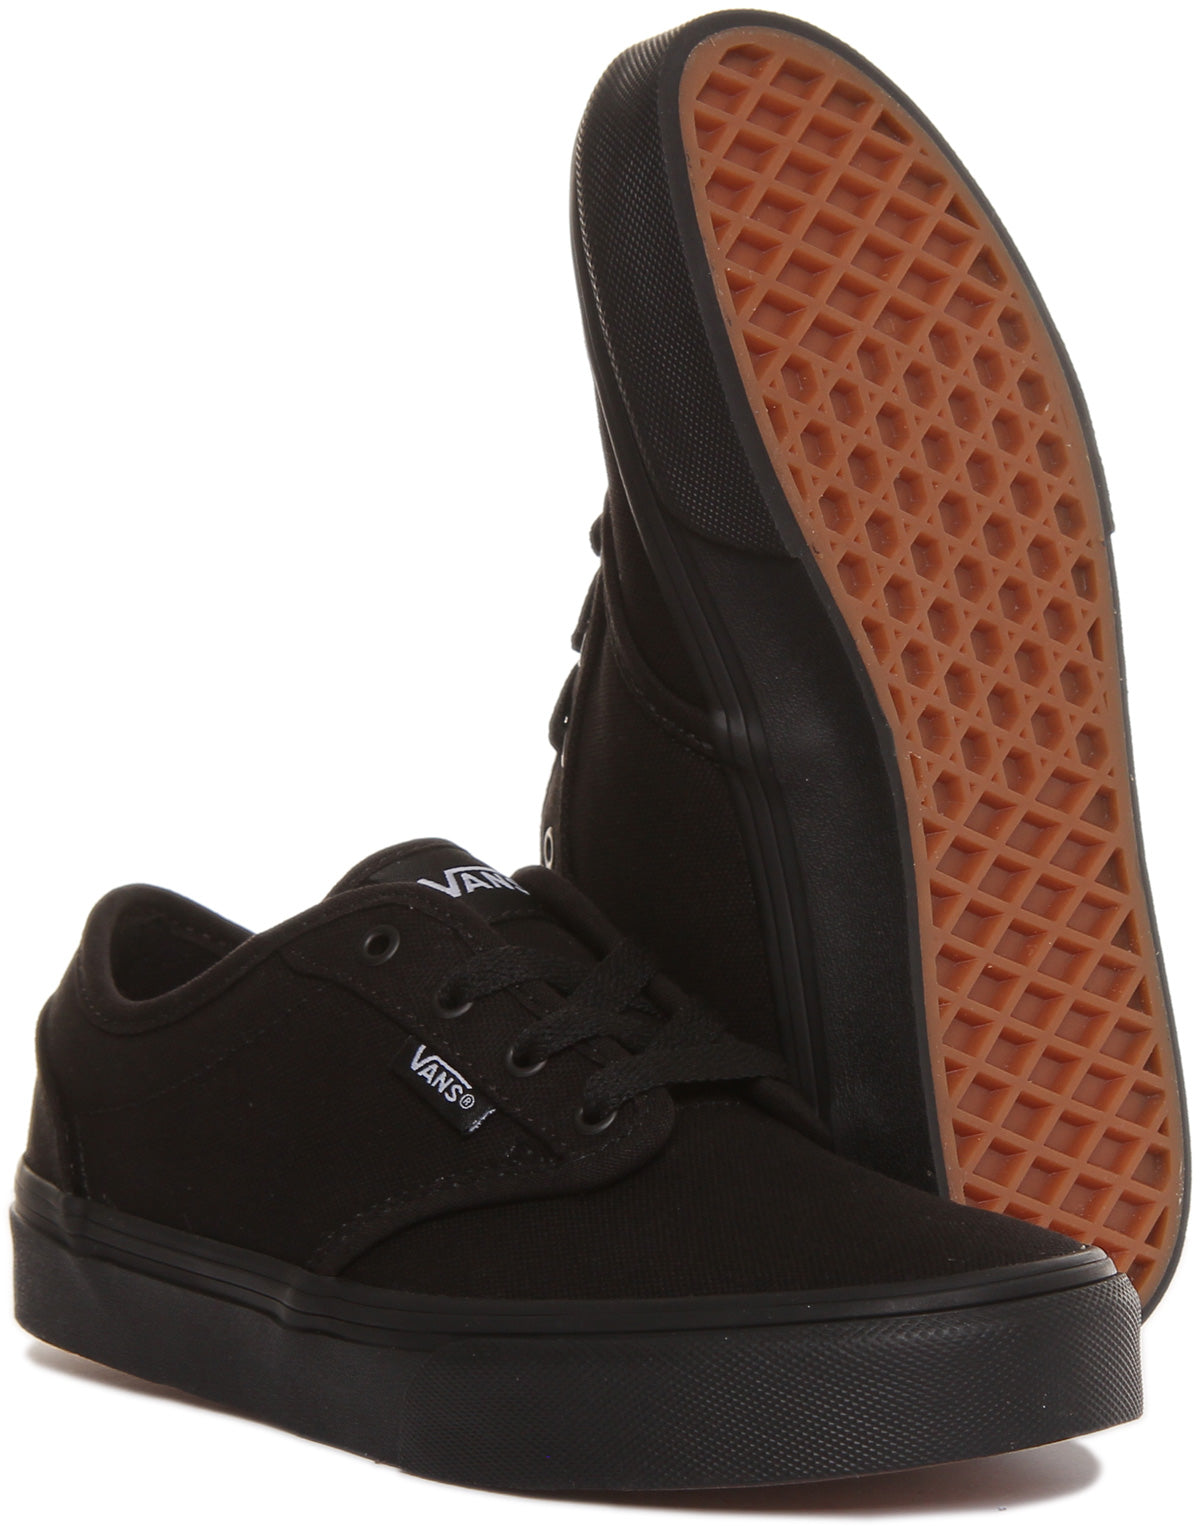 Vans Atwood In Black For Kids Size 2.5